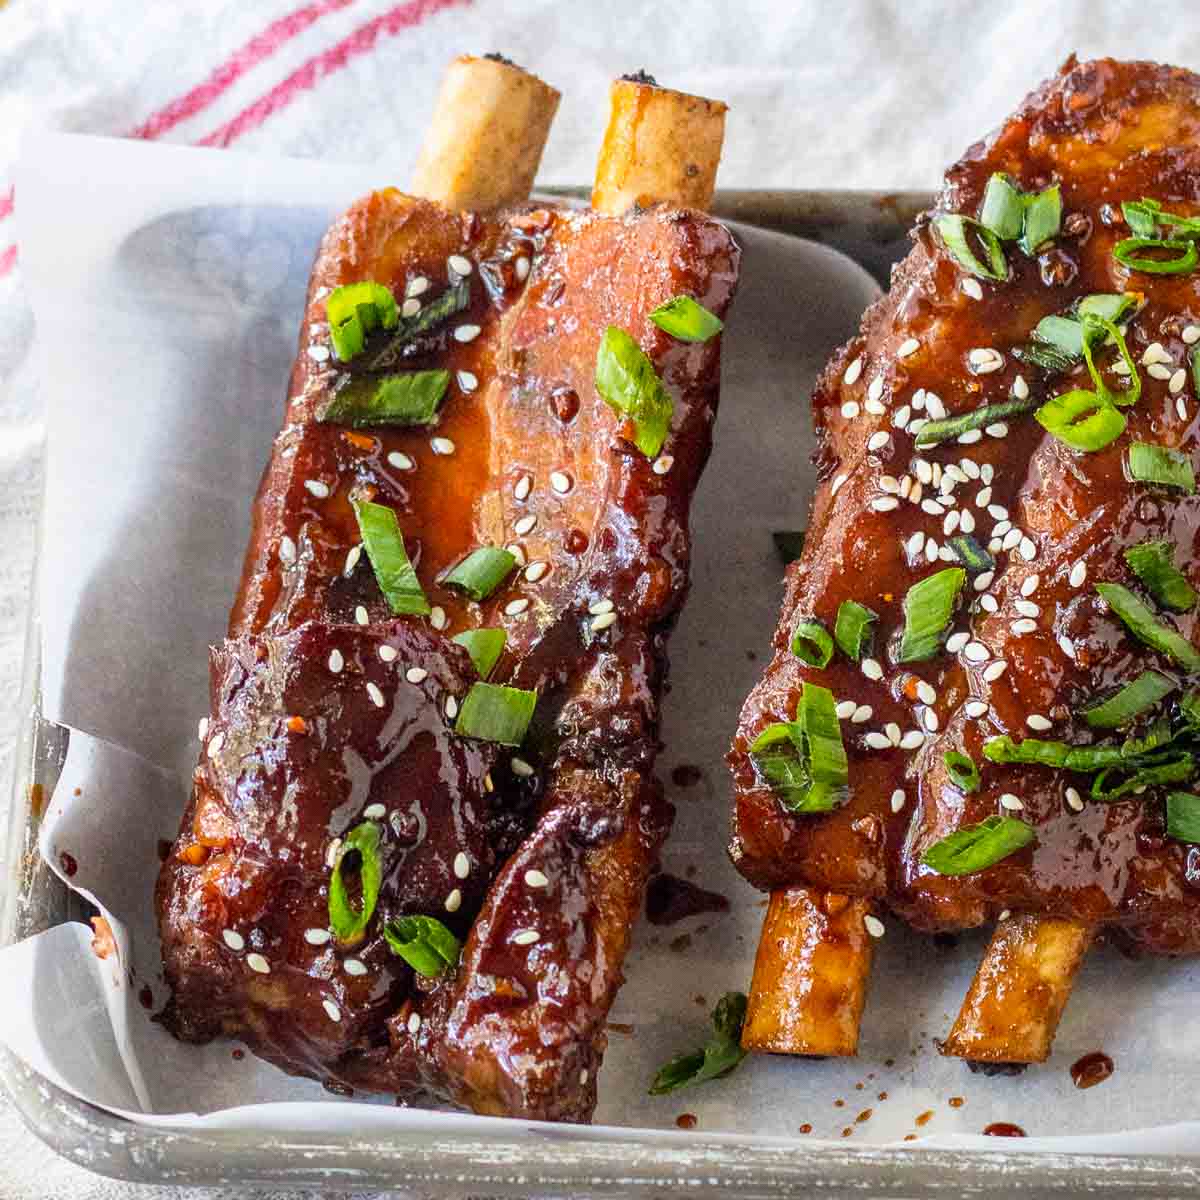 Two ribs on a tray with sesame seeds and green onions.